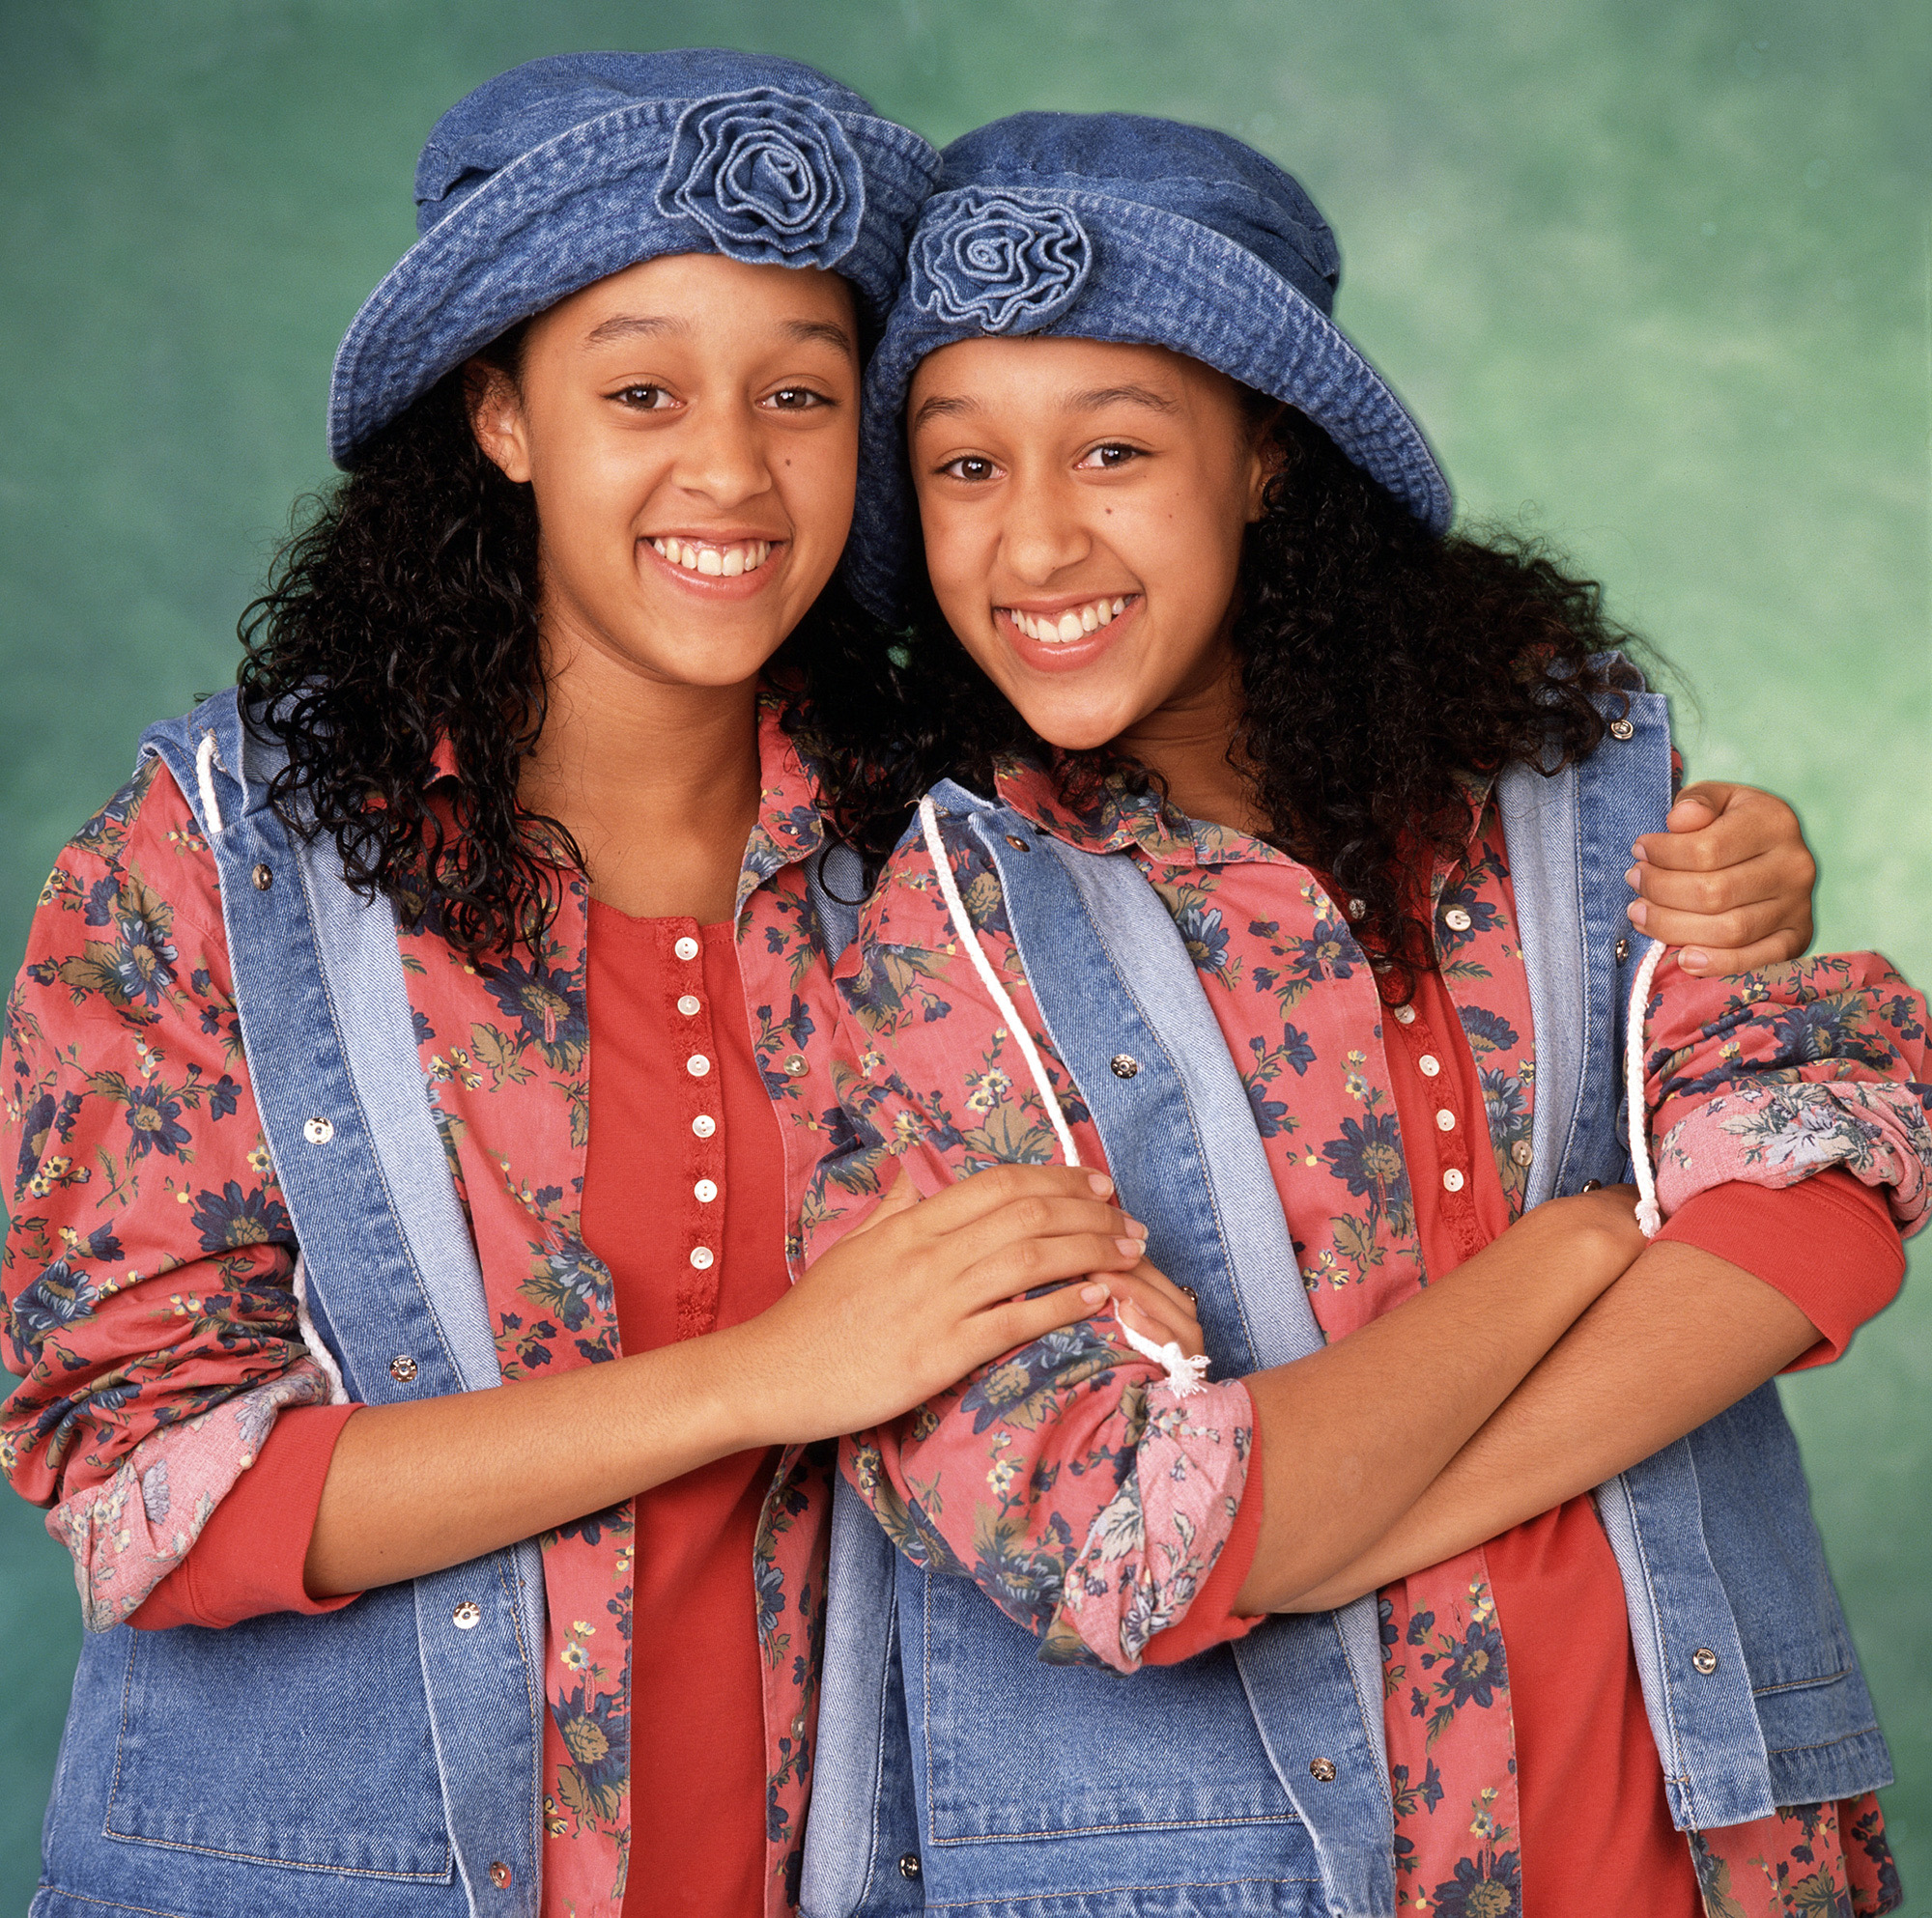  and say Happy Birthday the two and only Tia and Tamera Mowry  